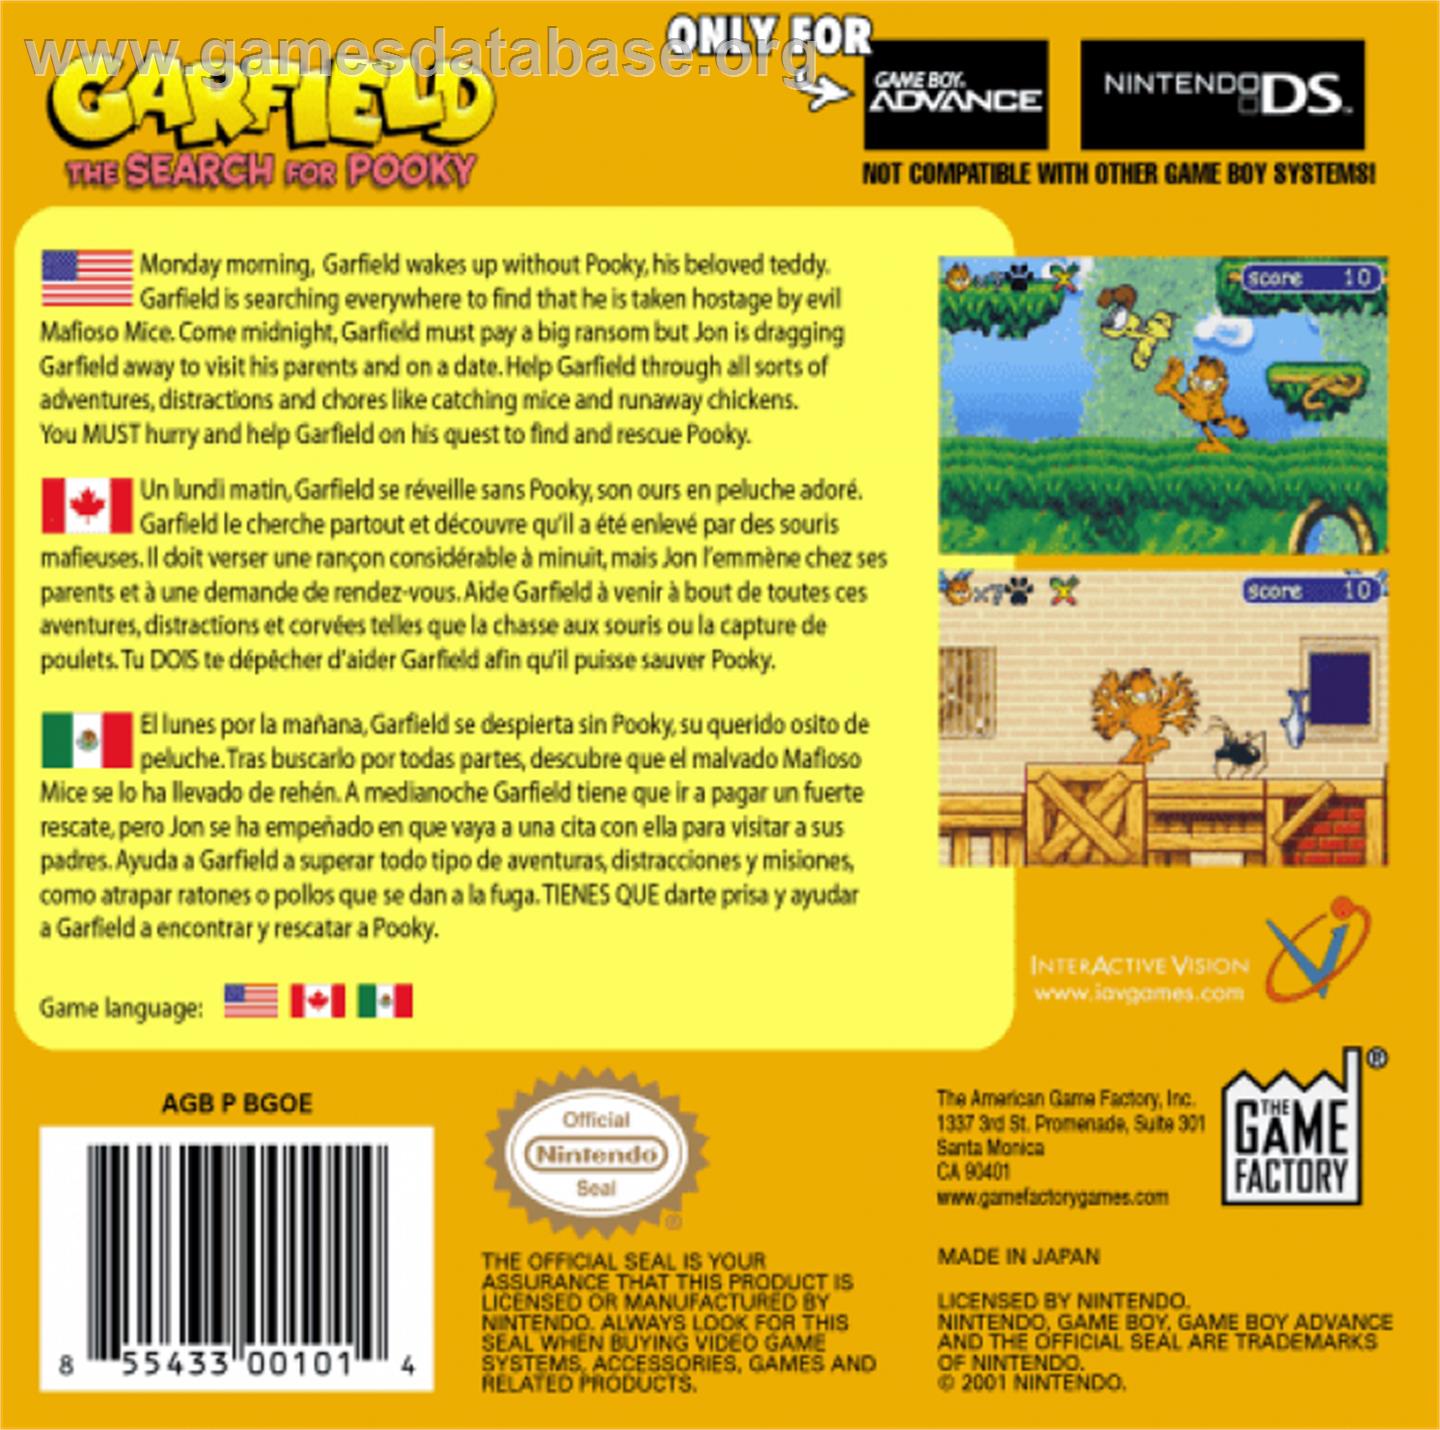 Garfield: The Search for Pooky - Nintendo Game Boy Advance - Artwork - Box Back